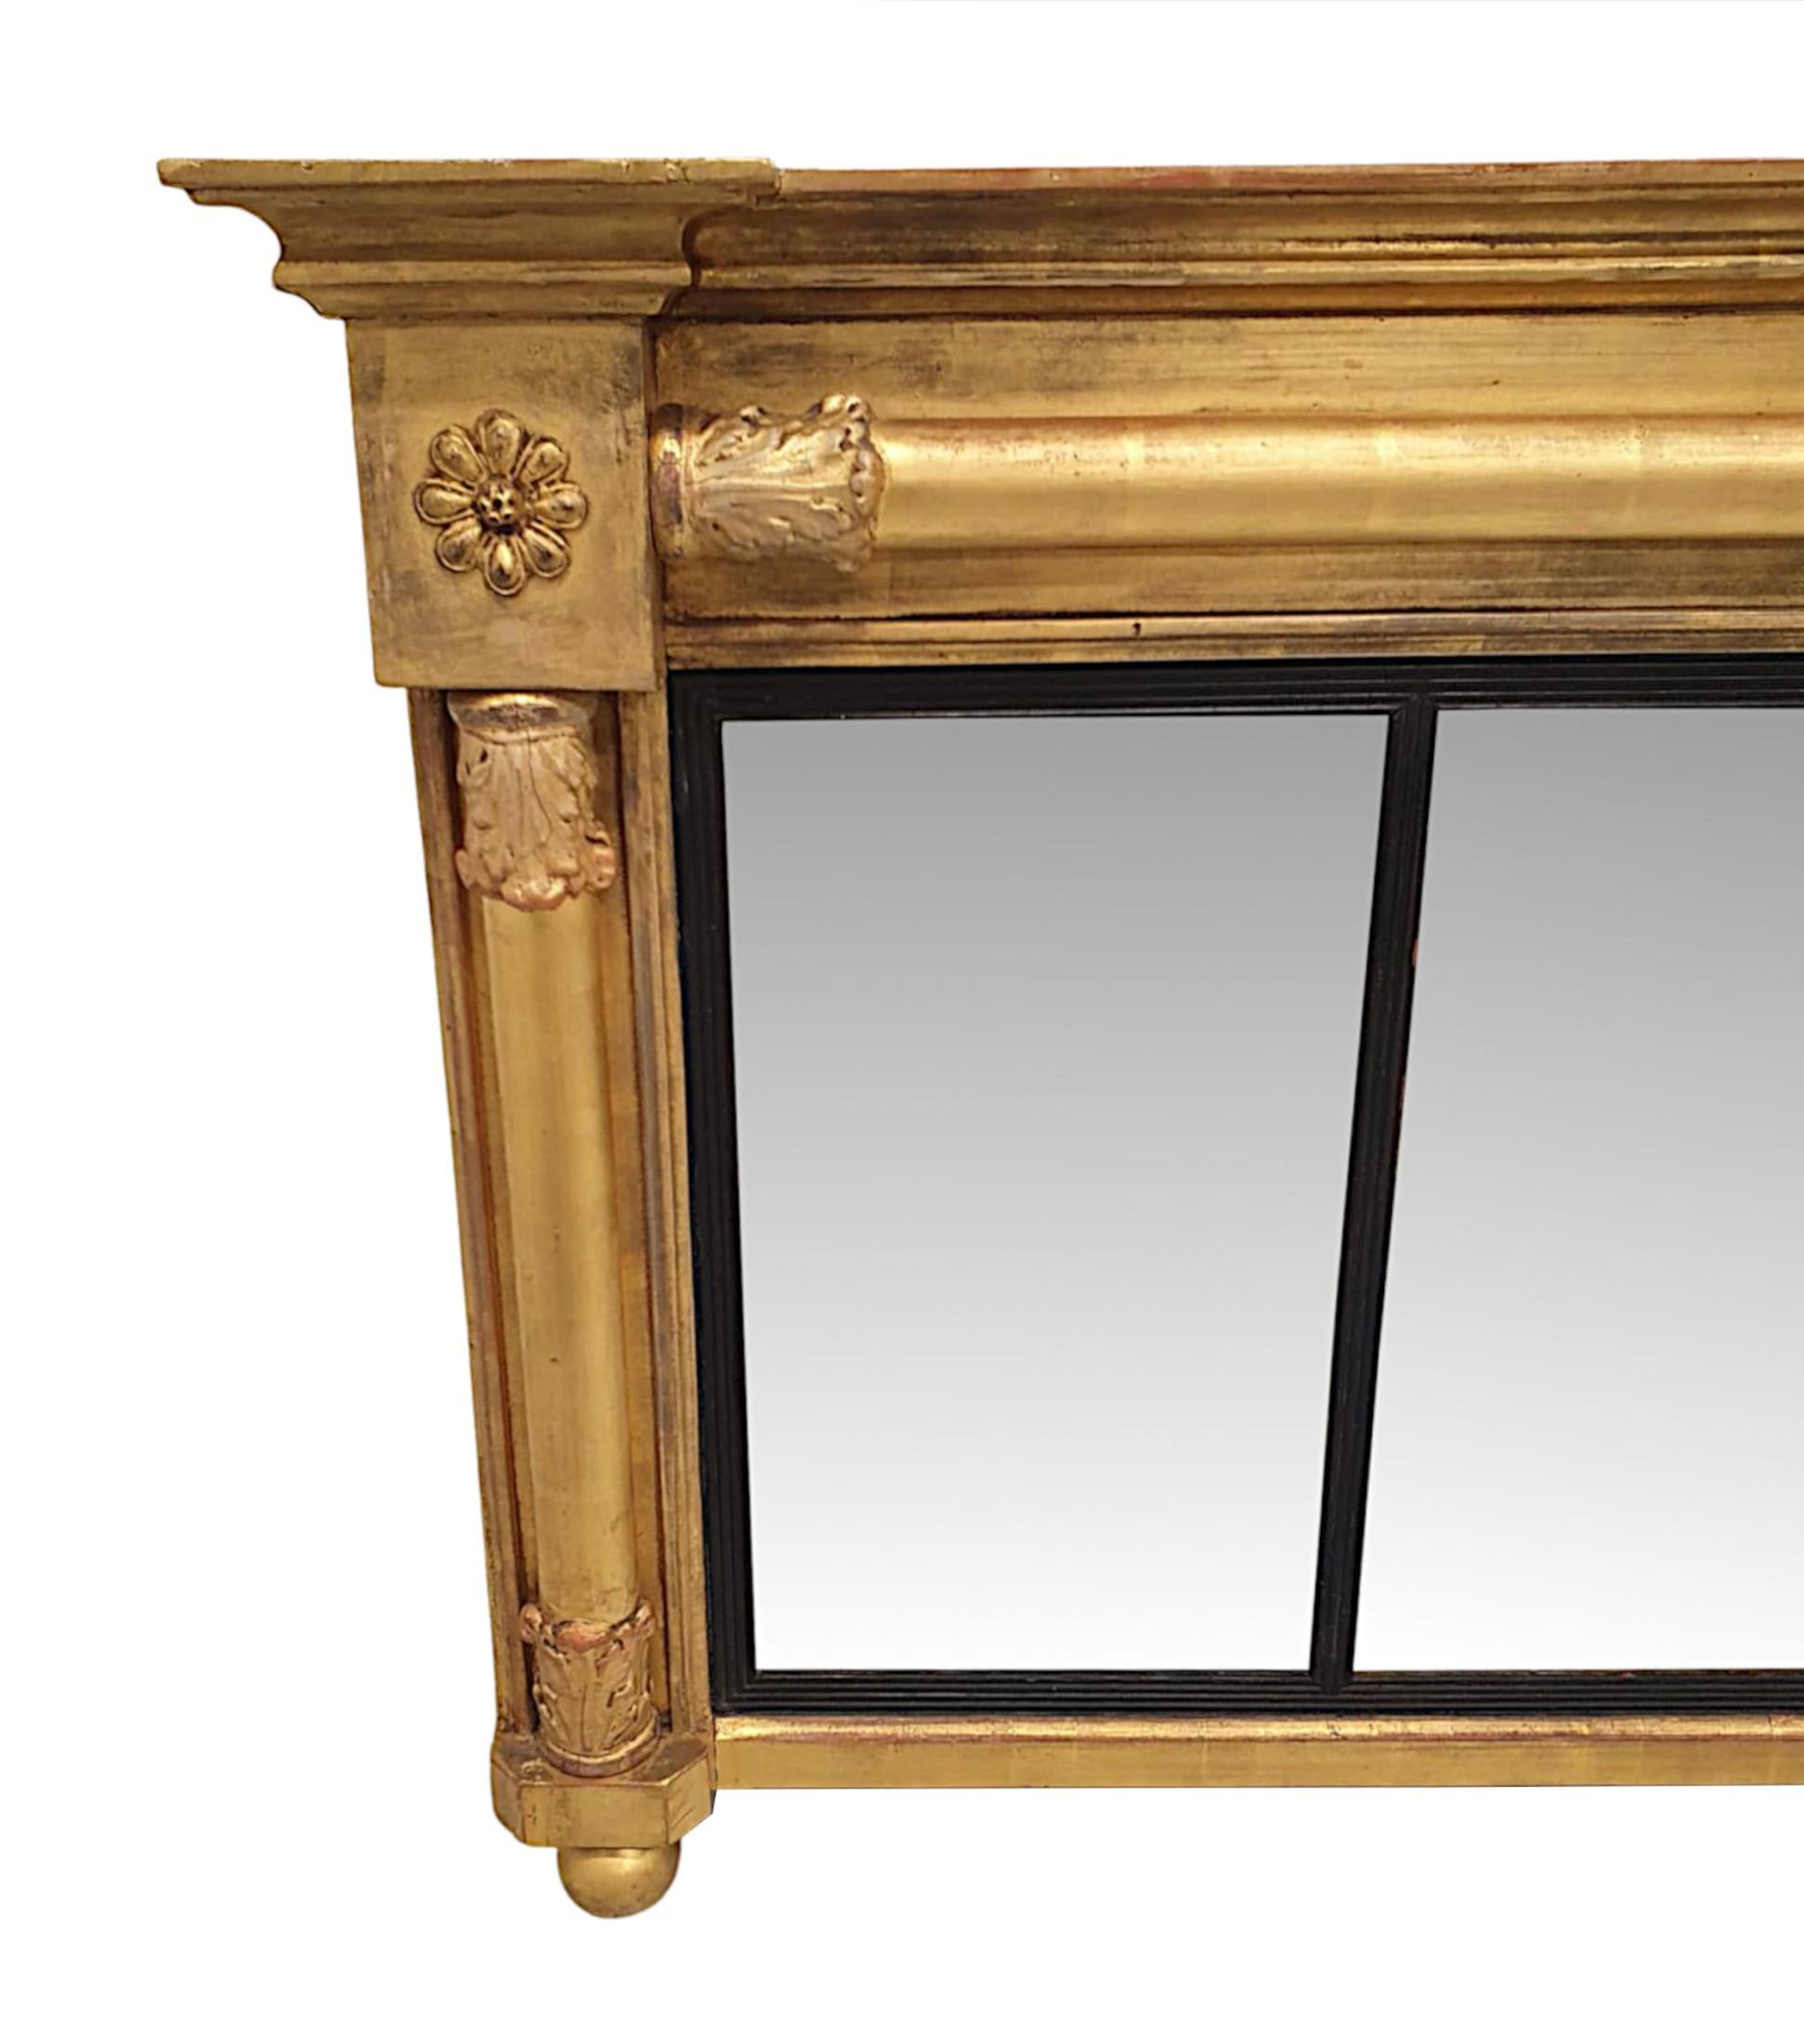 A Fabulous Unusual Early 19th Century William IV Giltwood Compartmental Mirror In Good Condition For Sale In Dublin, IE